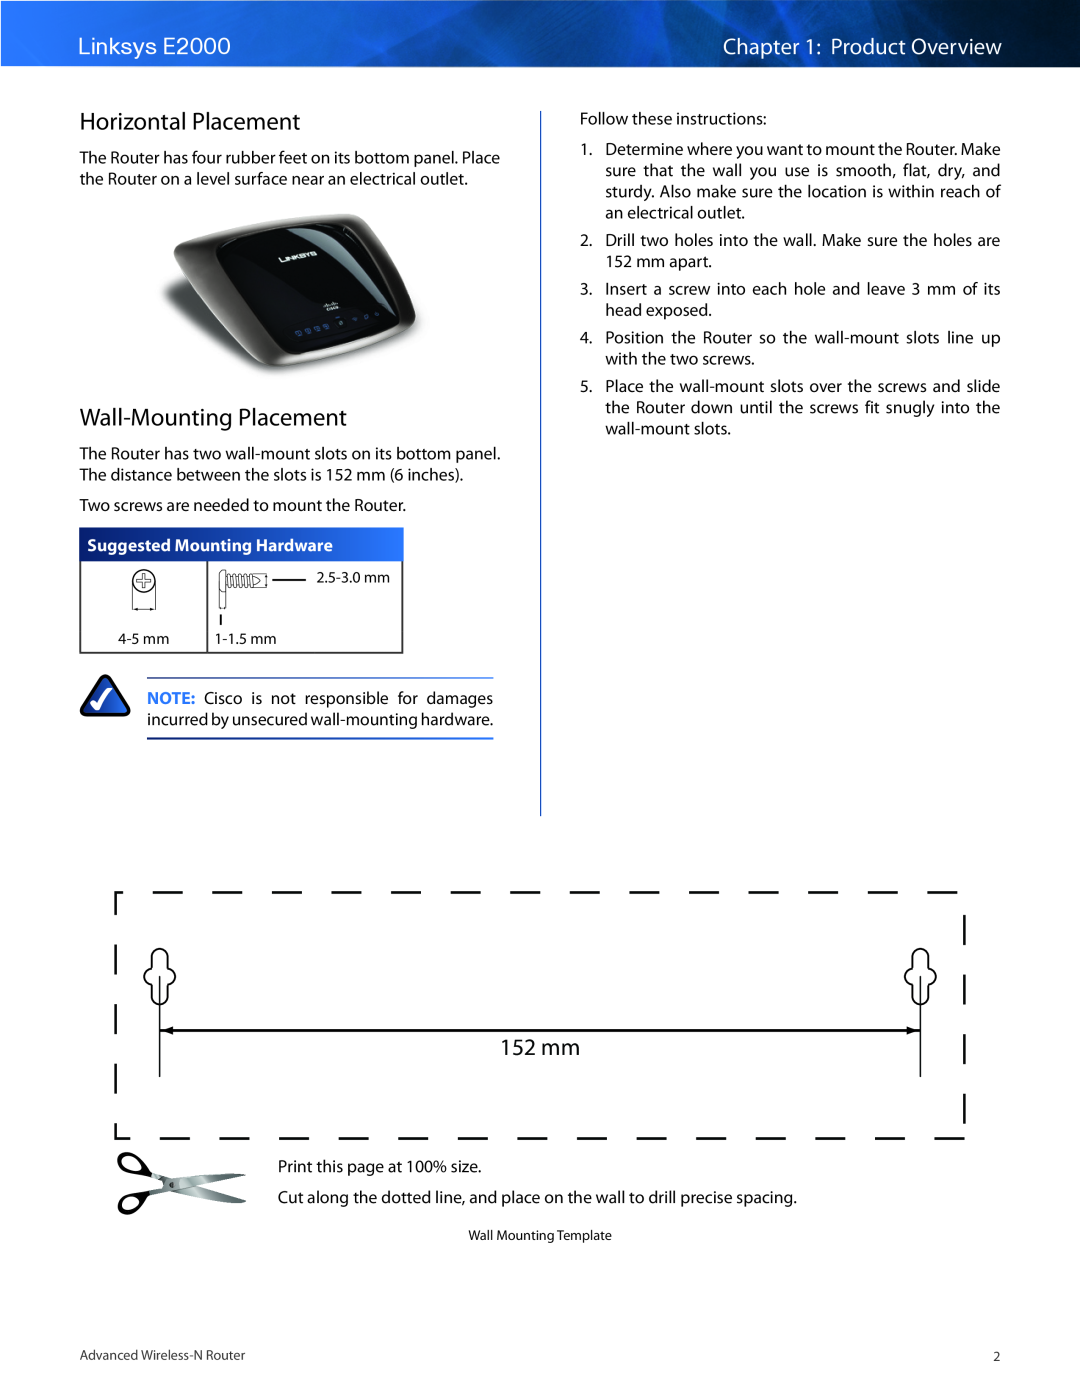 Cisco Systems manual Horizontal Placement, Wall-Mounting Placement, Suggested Mounting Hardware, 152 mm, Linksys E2000 